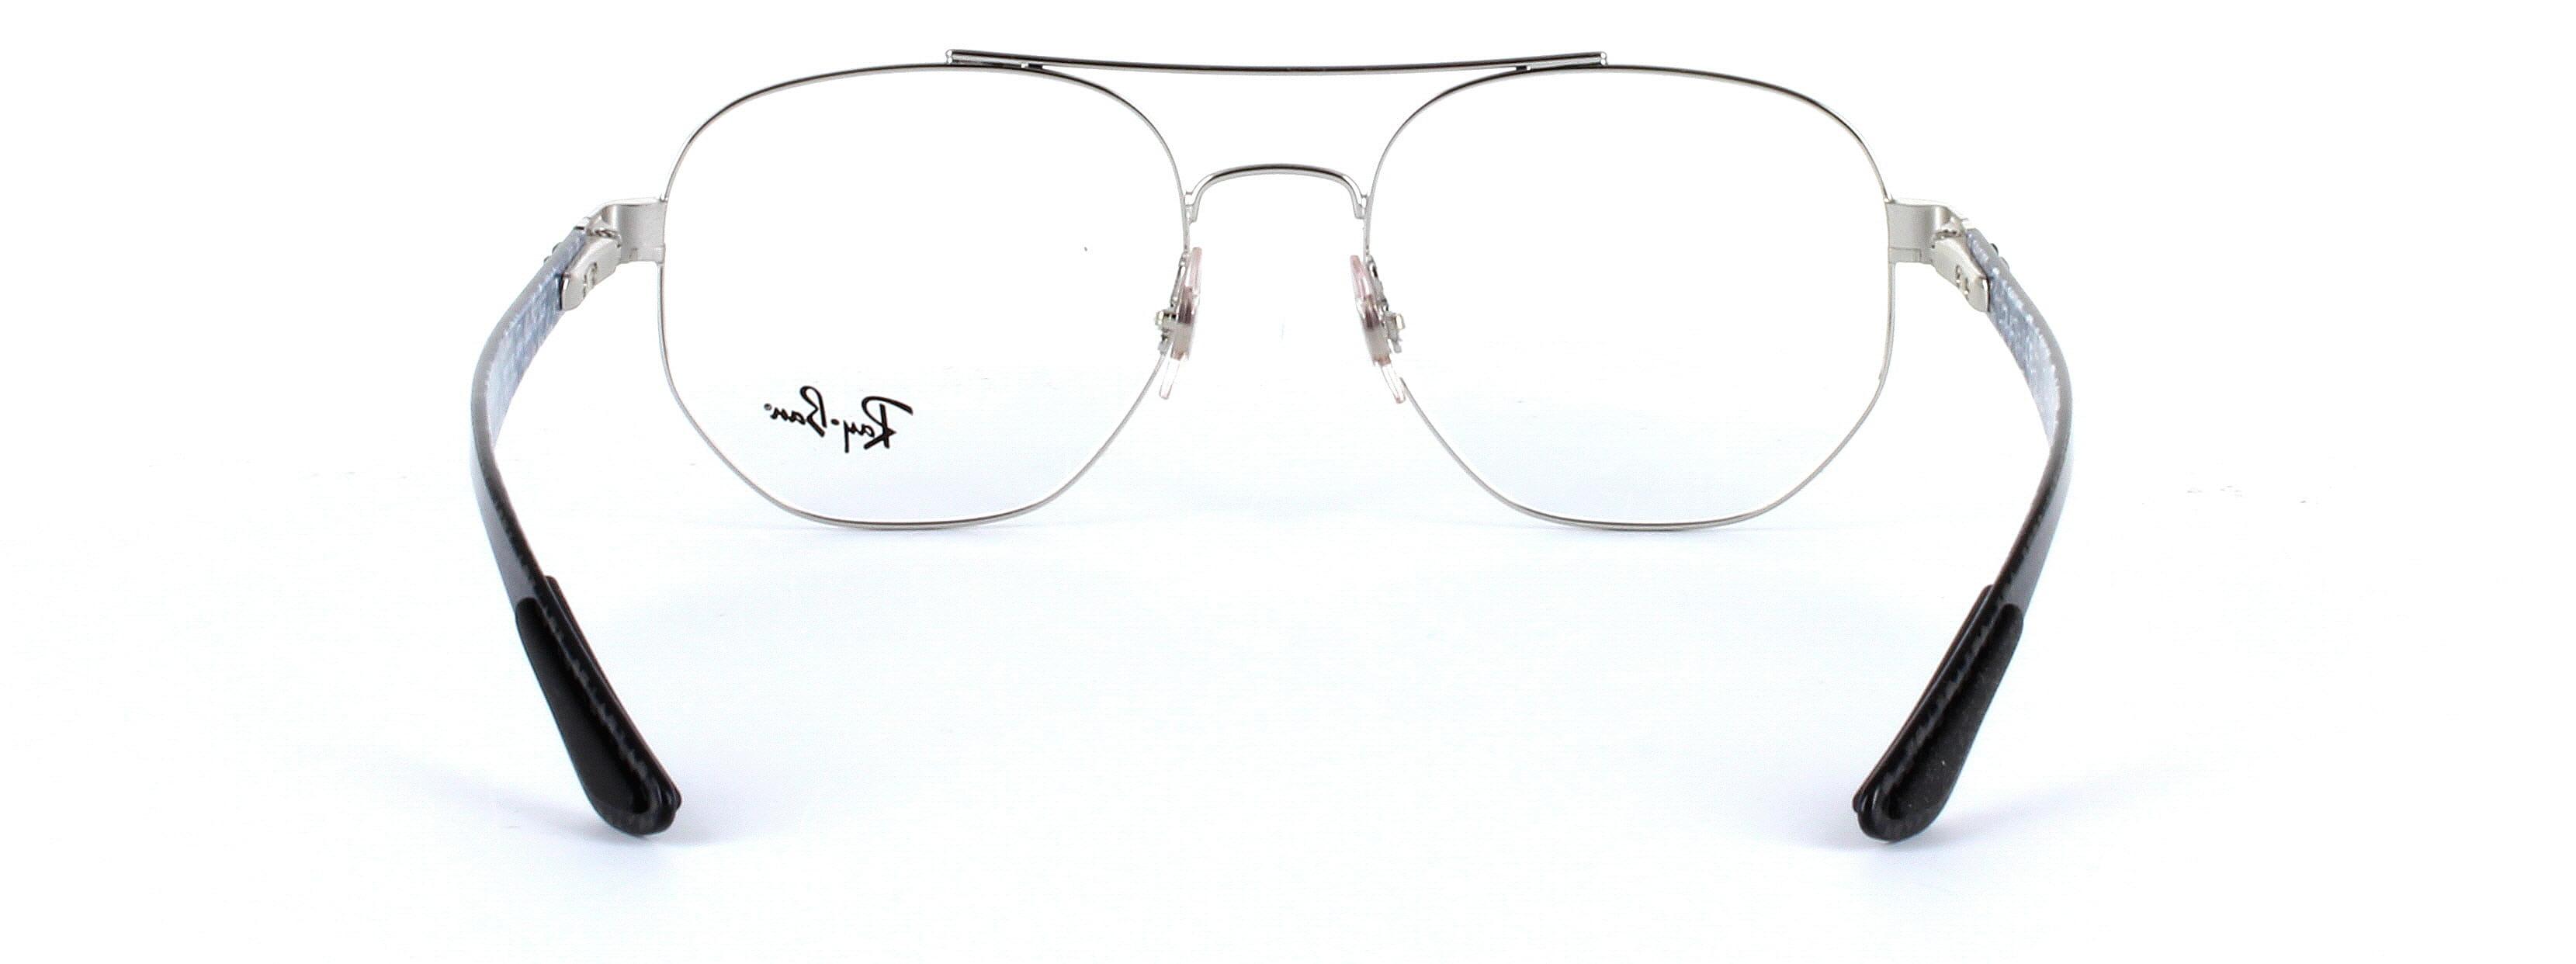 Ray Ban 8418 - Gents aviator style glasses - image 3